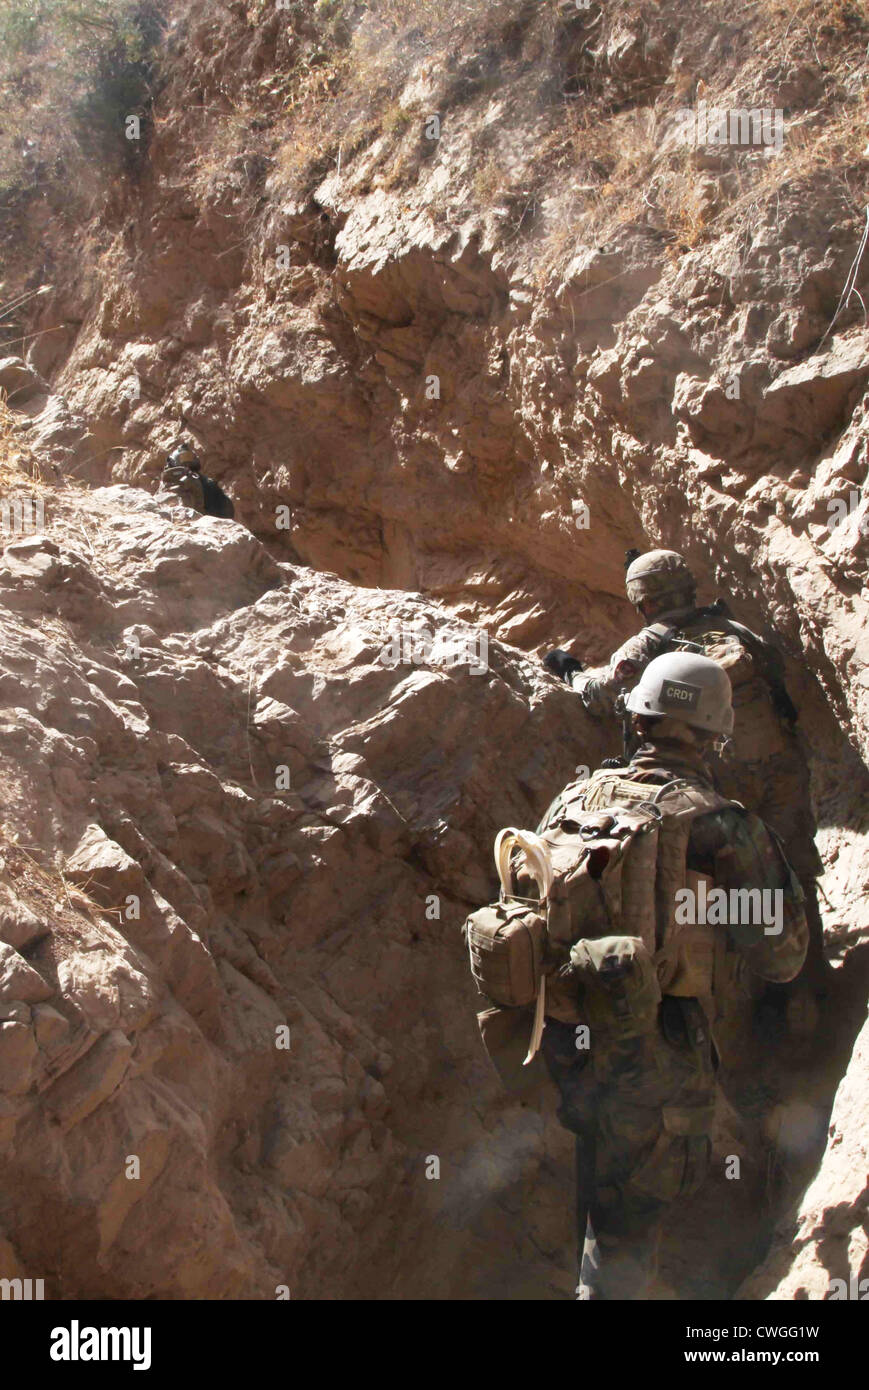 US special operations forces pursue an insurgent through a ravine during a clearing operation September 13, 2011 in Kishim district, Babakashan province, Afghanistan. With the support of special operations forces, Afghan National Army commandos clear a village to disrupt insurgent activity. Stock Photo